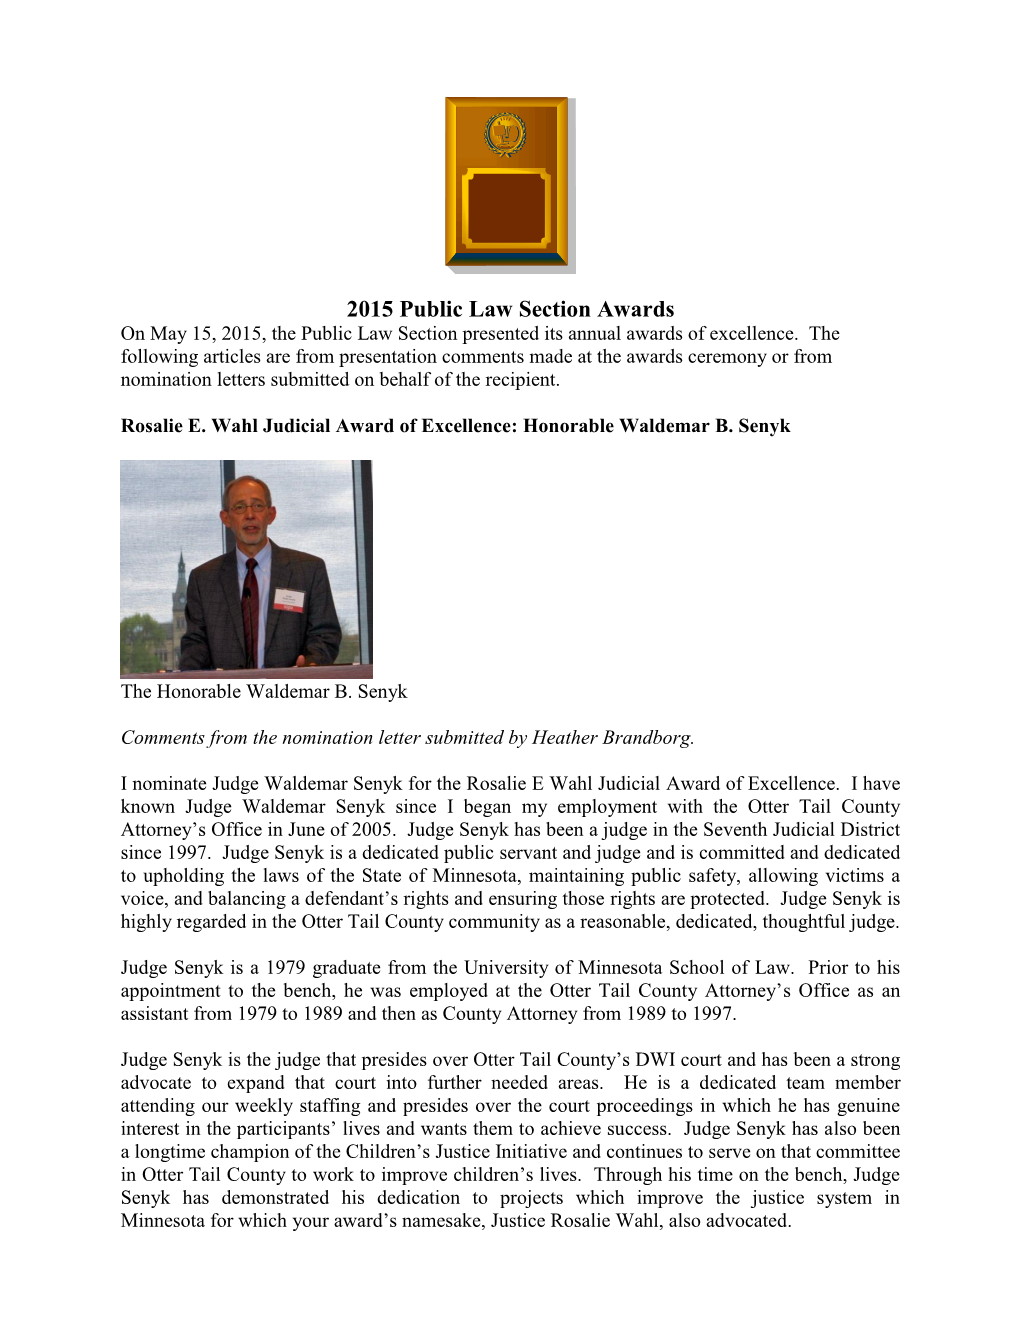 2015 Public Law Section Awards on May 15, 2015, the Public Law Section Presented Its Annual Awards of Excellence